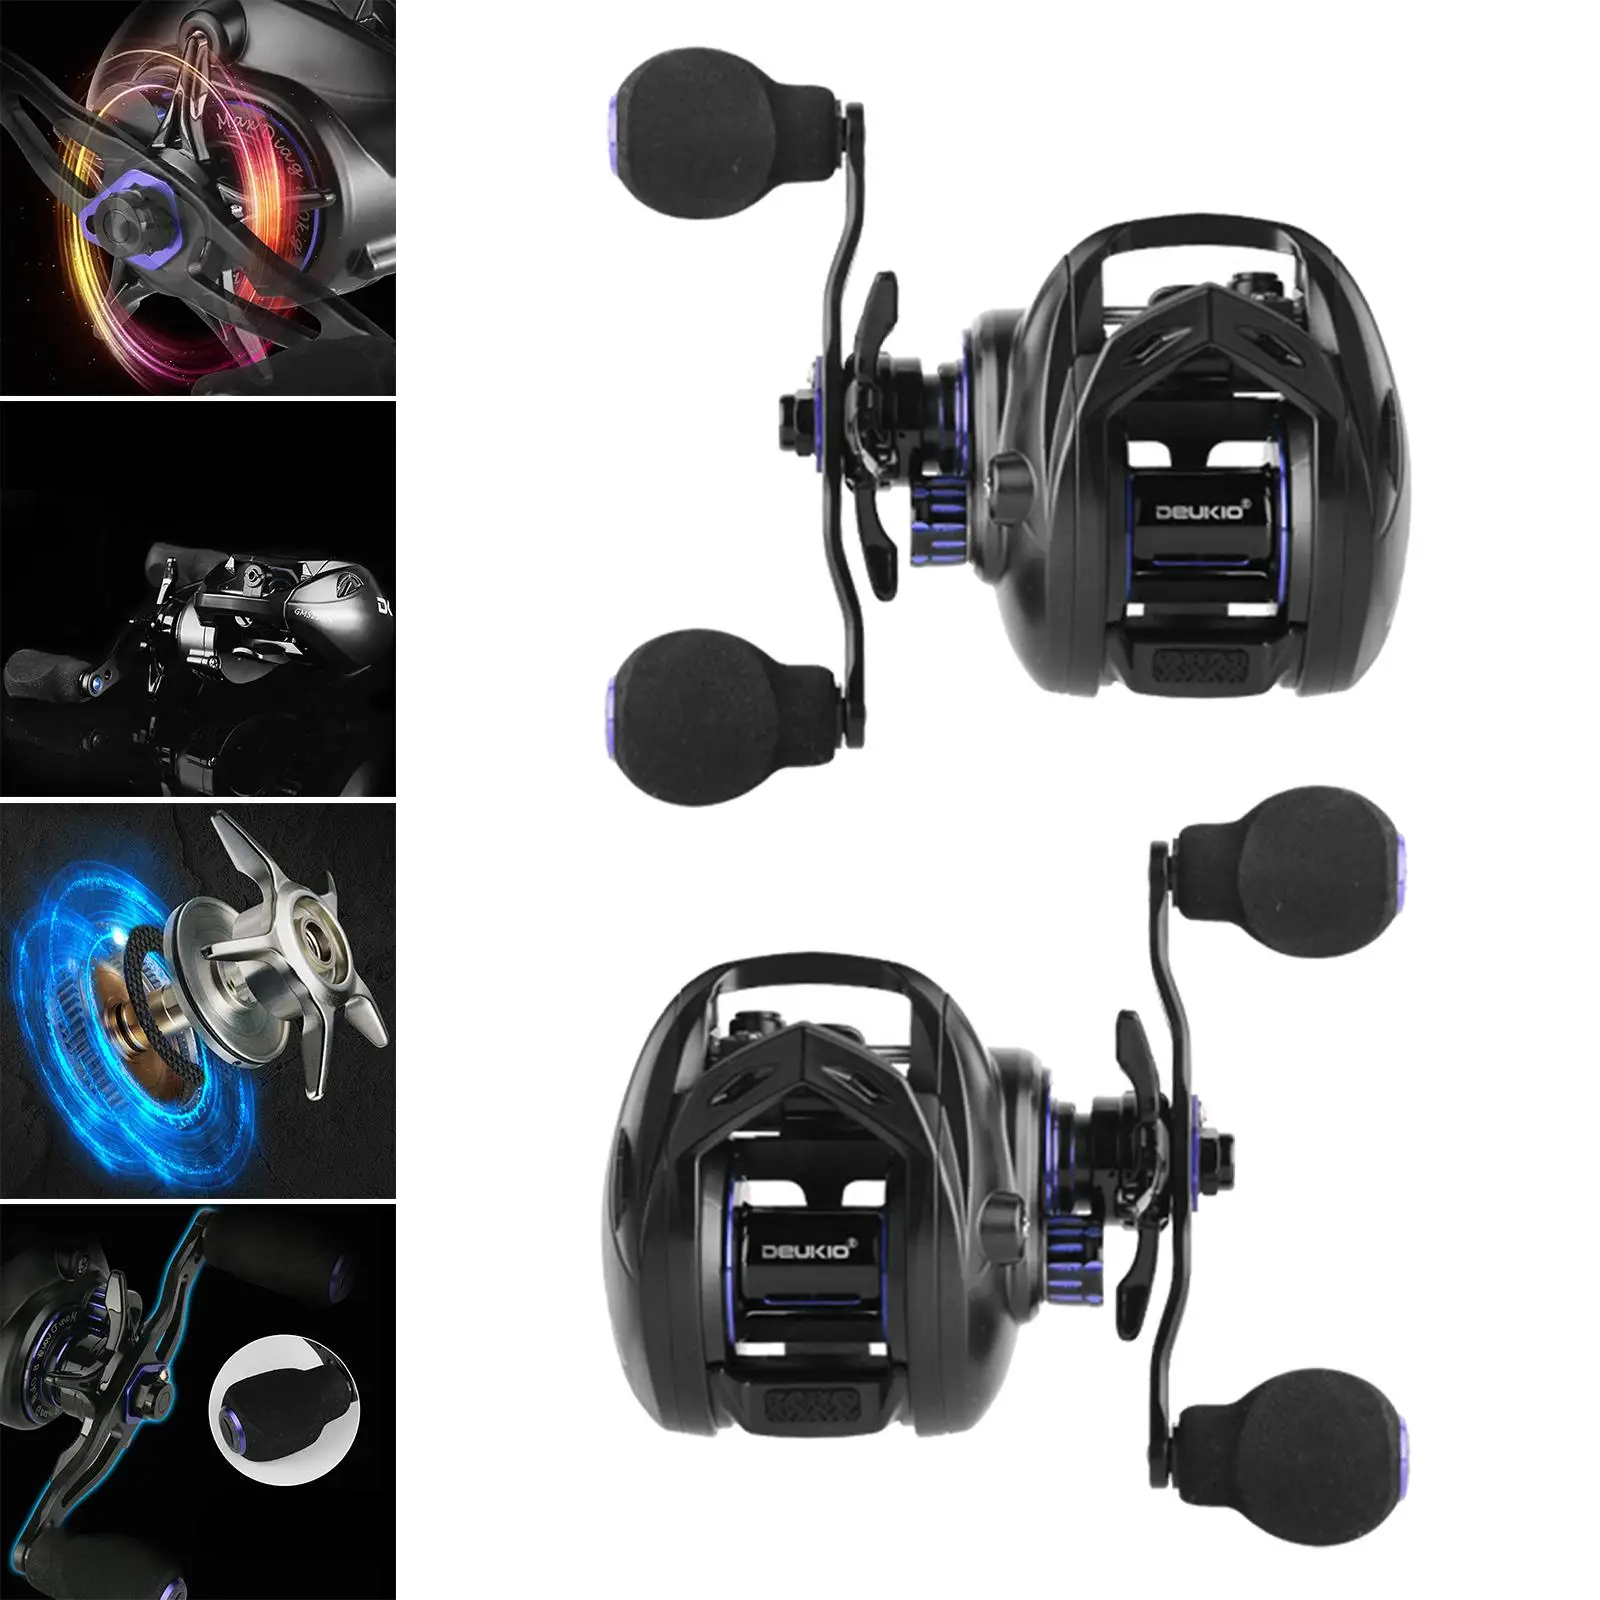 High Speed Fishing reels 5+1 BB 6.3:1 Gear Ratio up to 8kg casting reels